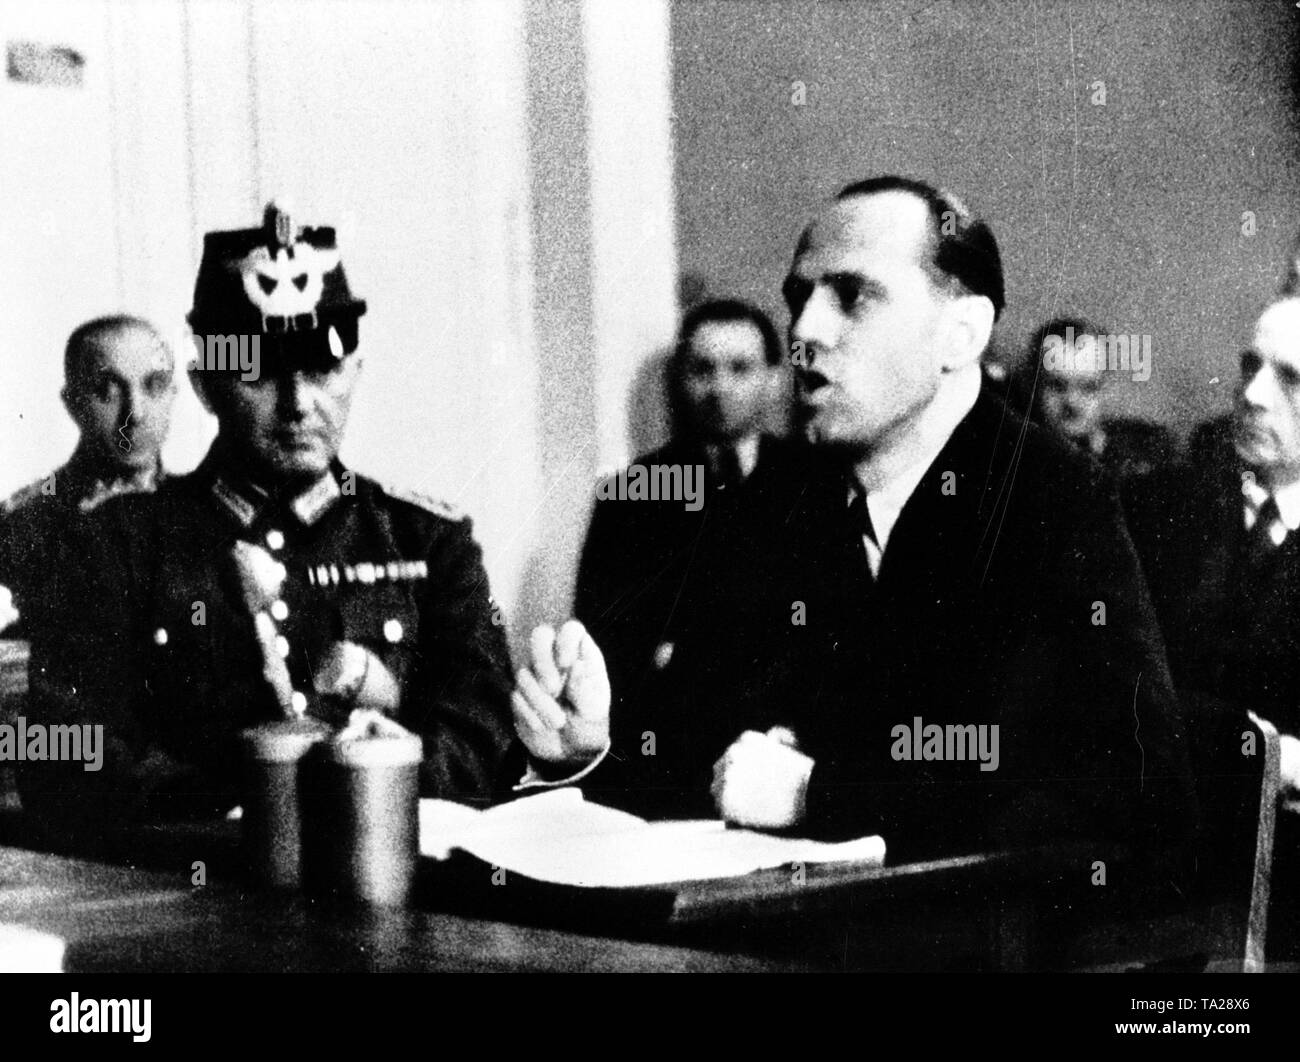 Helmuth James Graf von Moltke, member of the 'Kreisau Circle' resistance group. The picture shows von Moltke as defendant before the People's Court in Berlin, that sentenced him to death. He was executed on 23.01.1945. Stock Photo